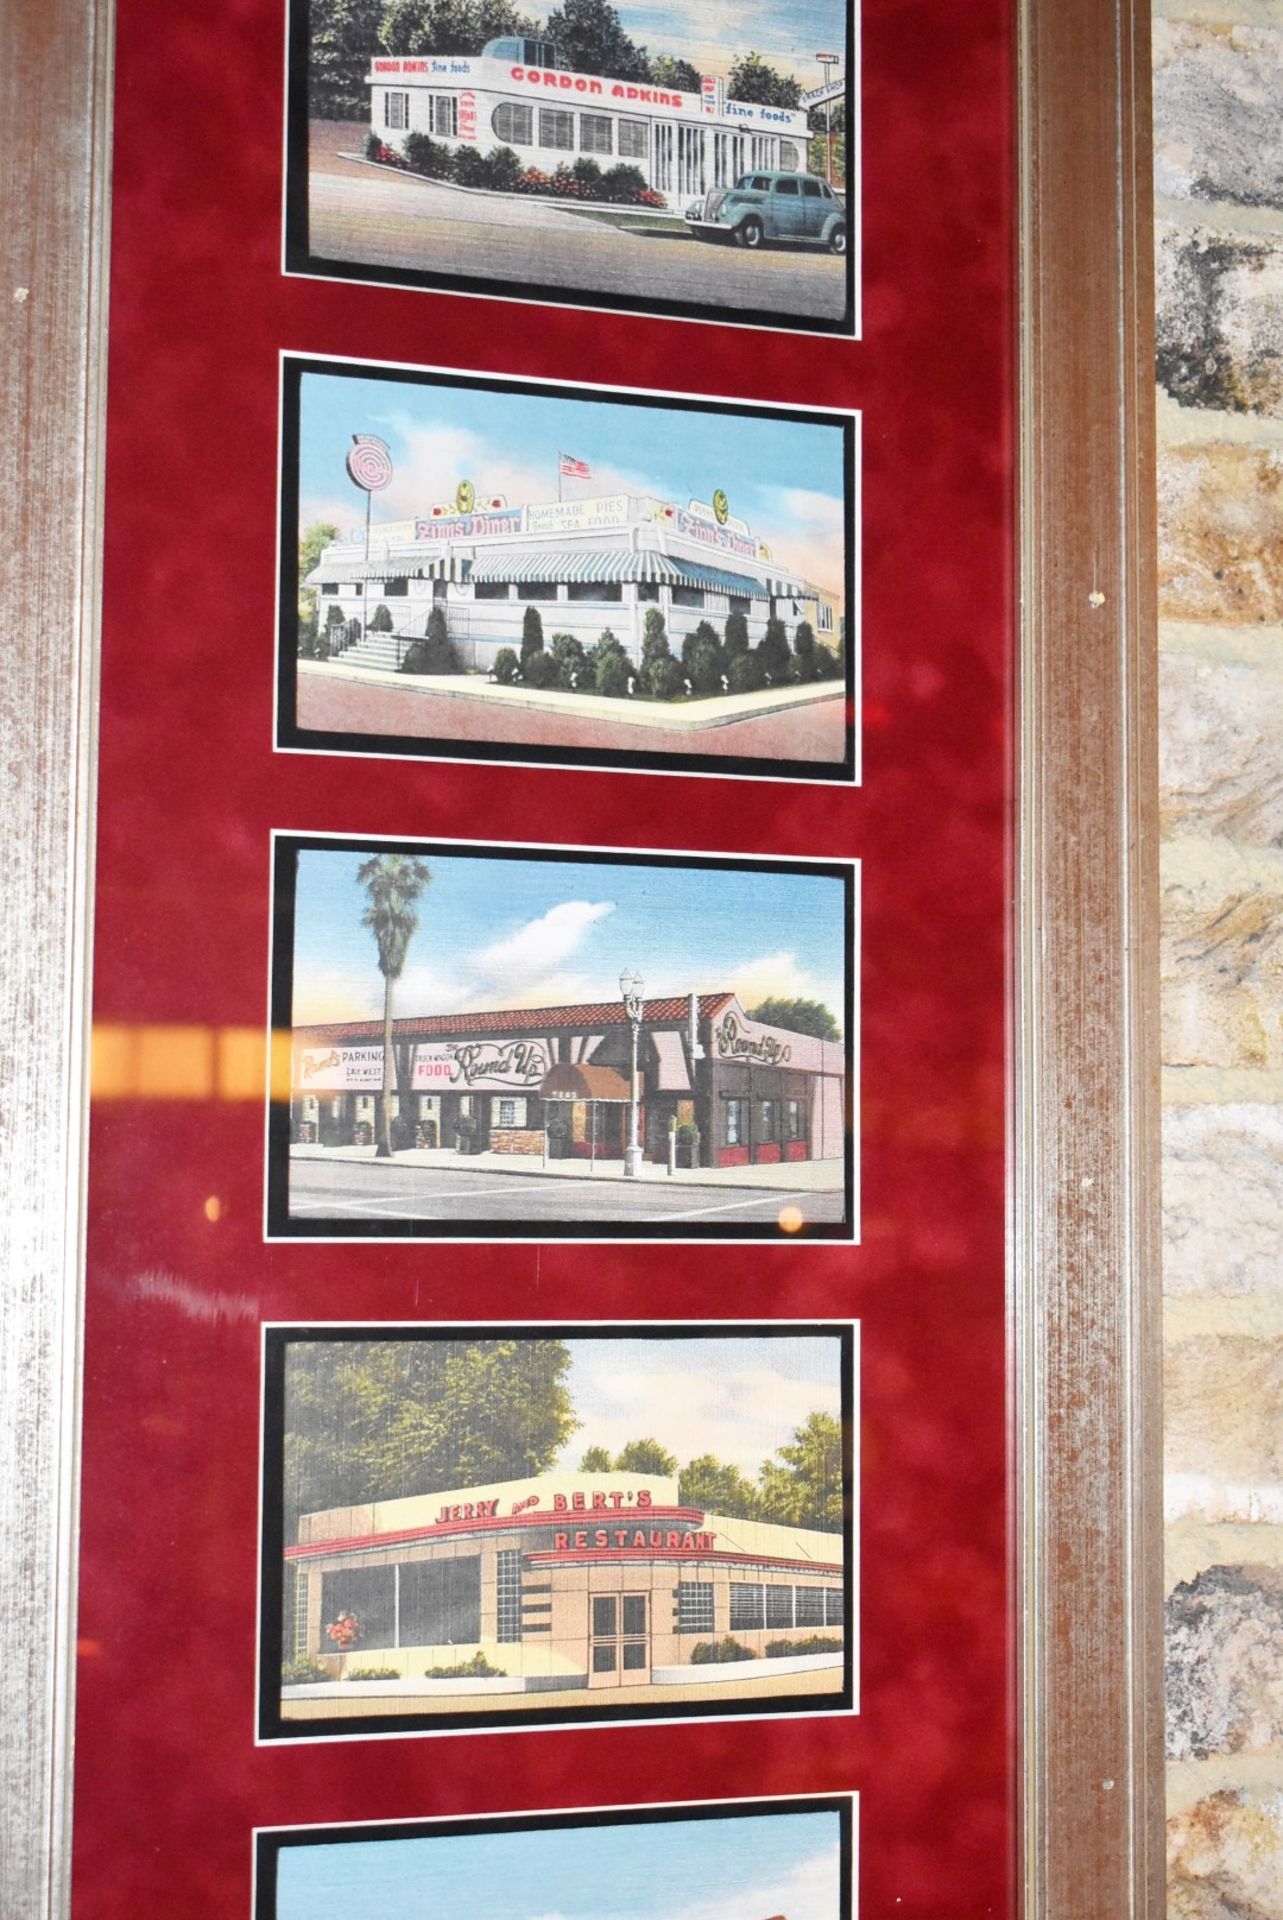 1 x Framed Wall Picture Featuring Images of American Diners / Restaurants - Image 3 of 4